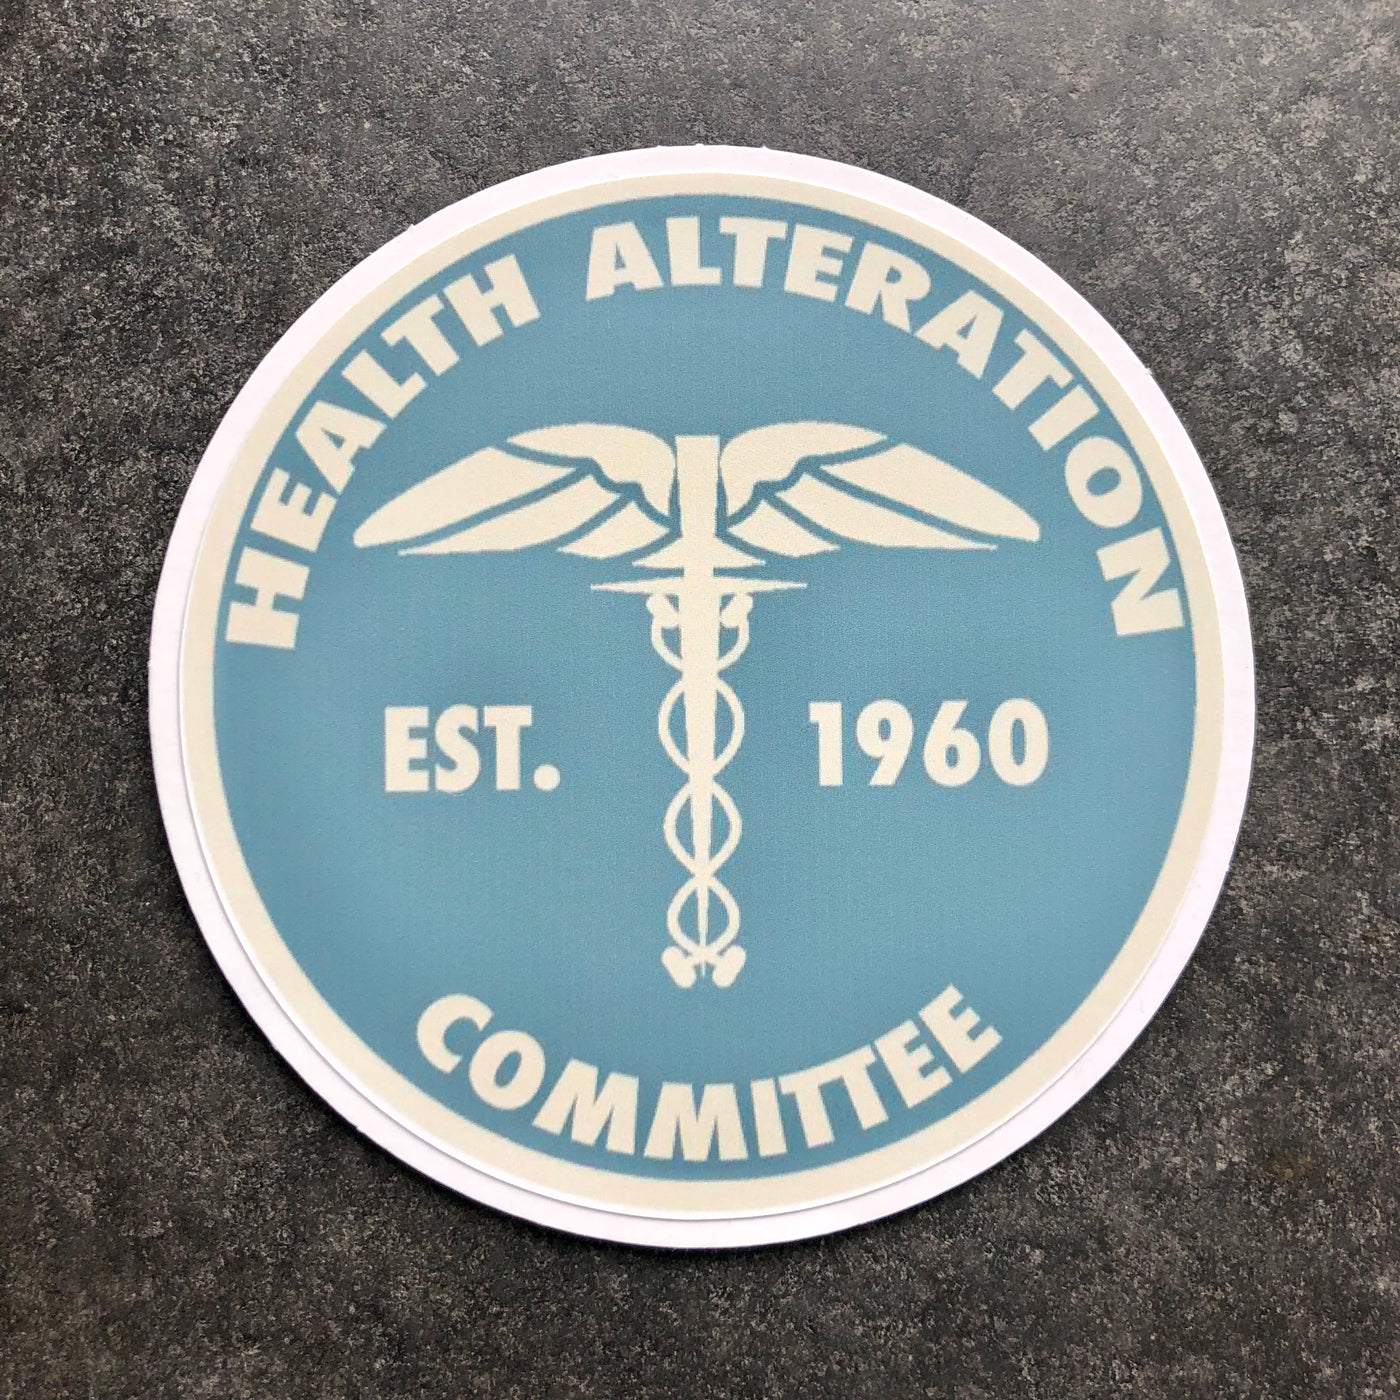 Health Alteration Committee Sticker